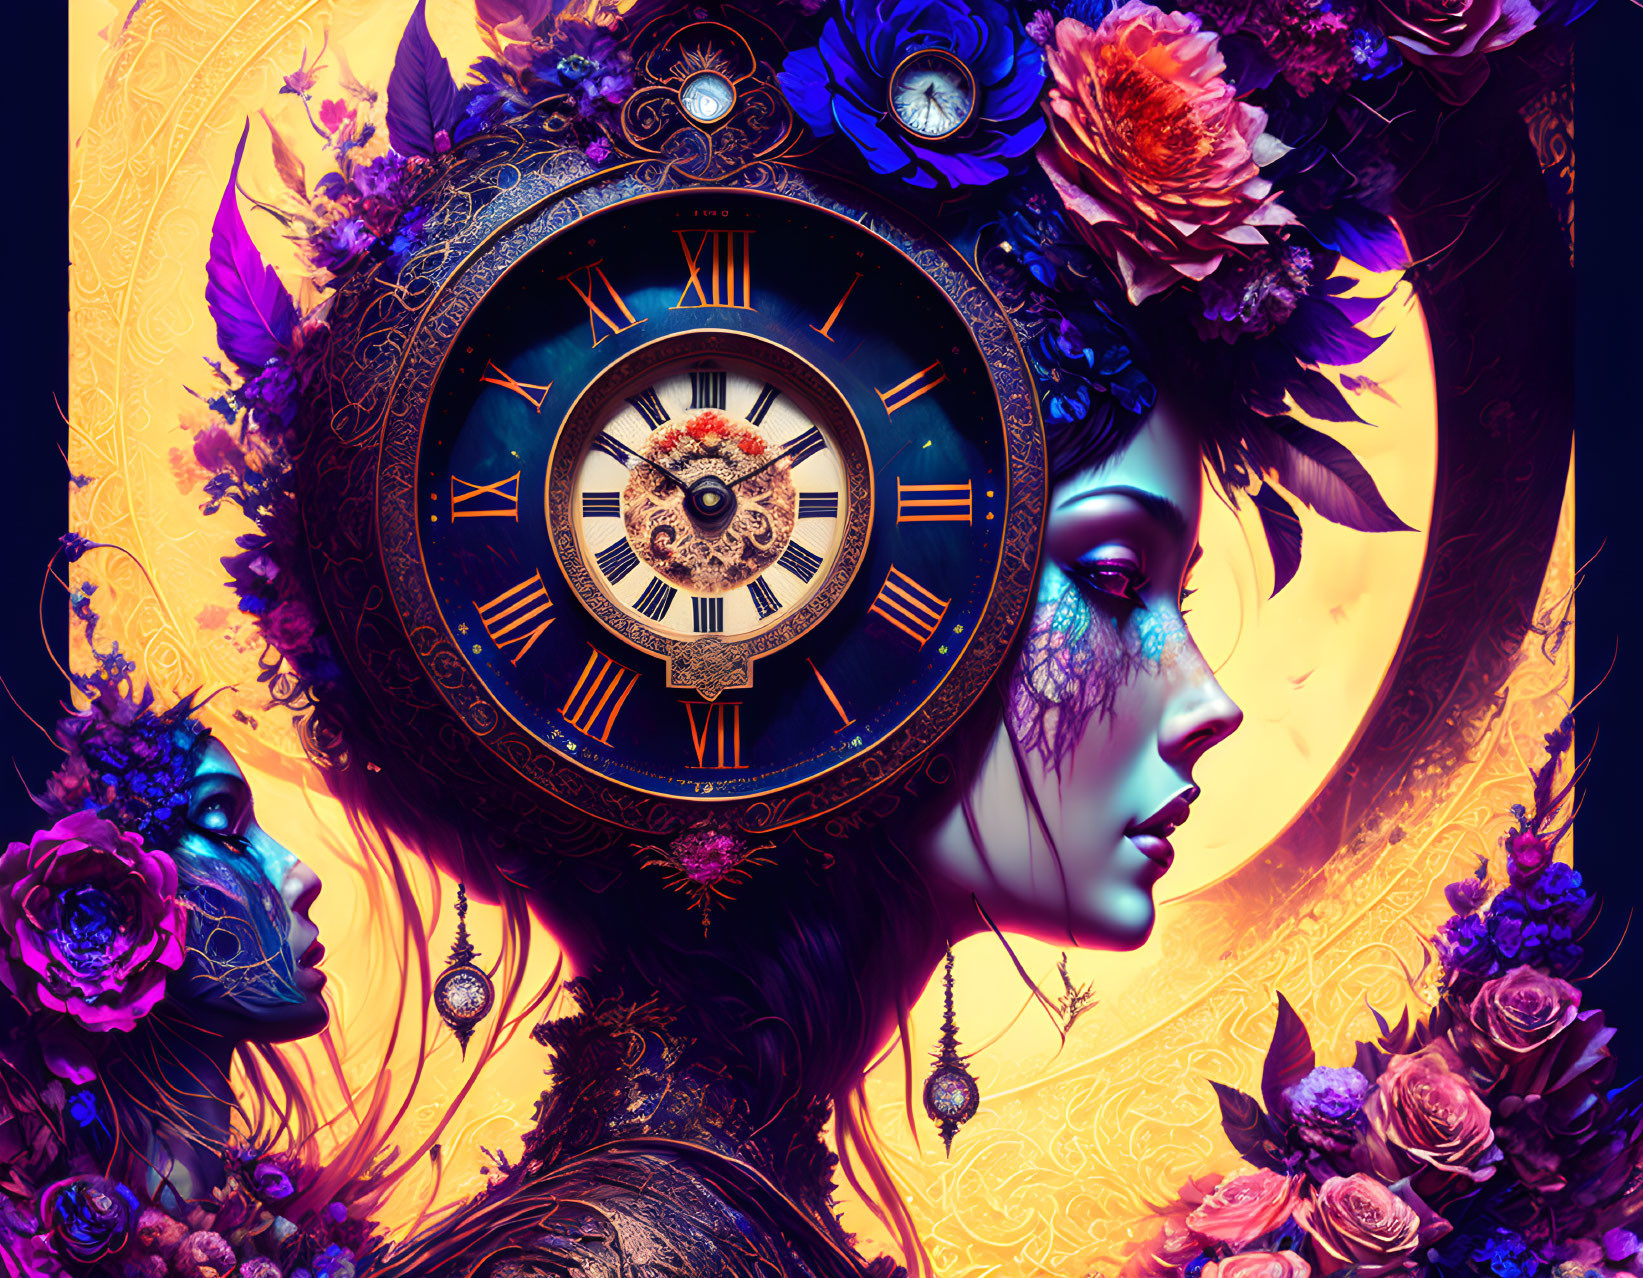 Vibrant artwork: Two female figures with floral and clockwork details under a crescent moon